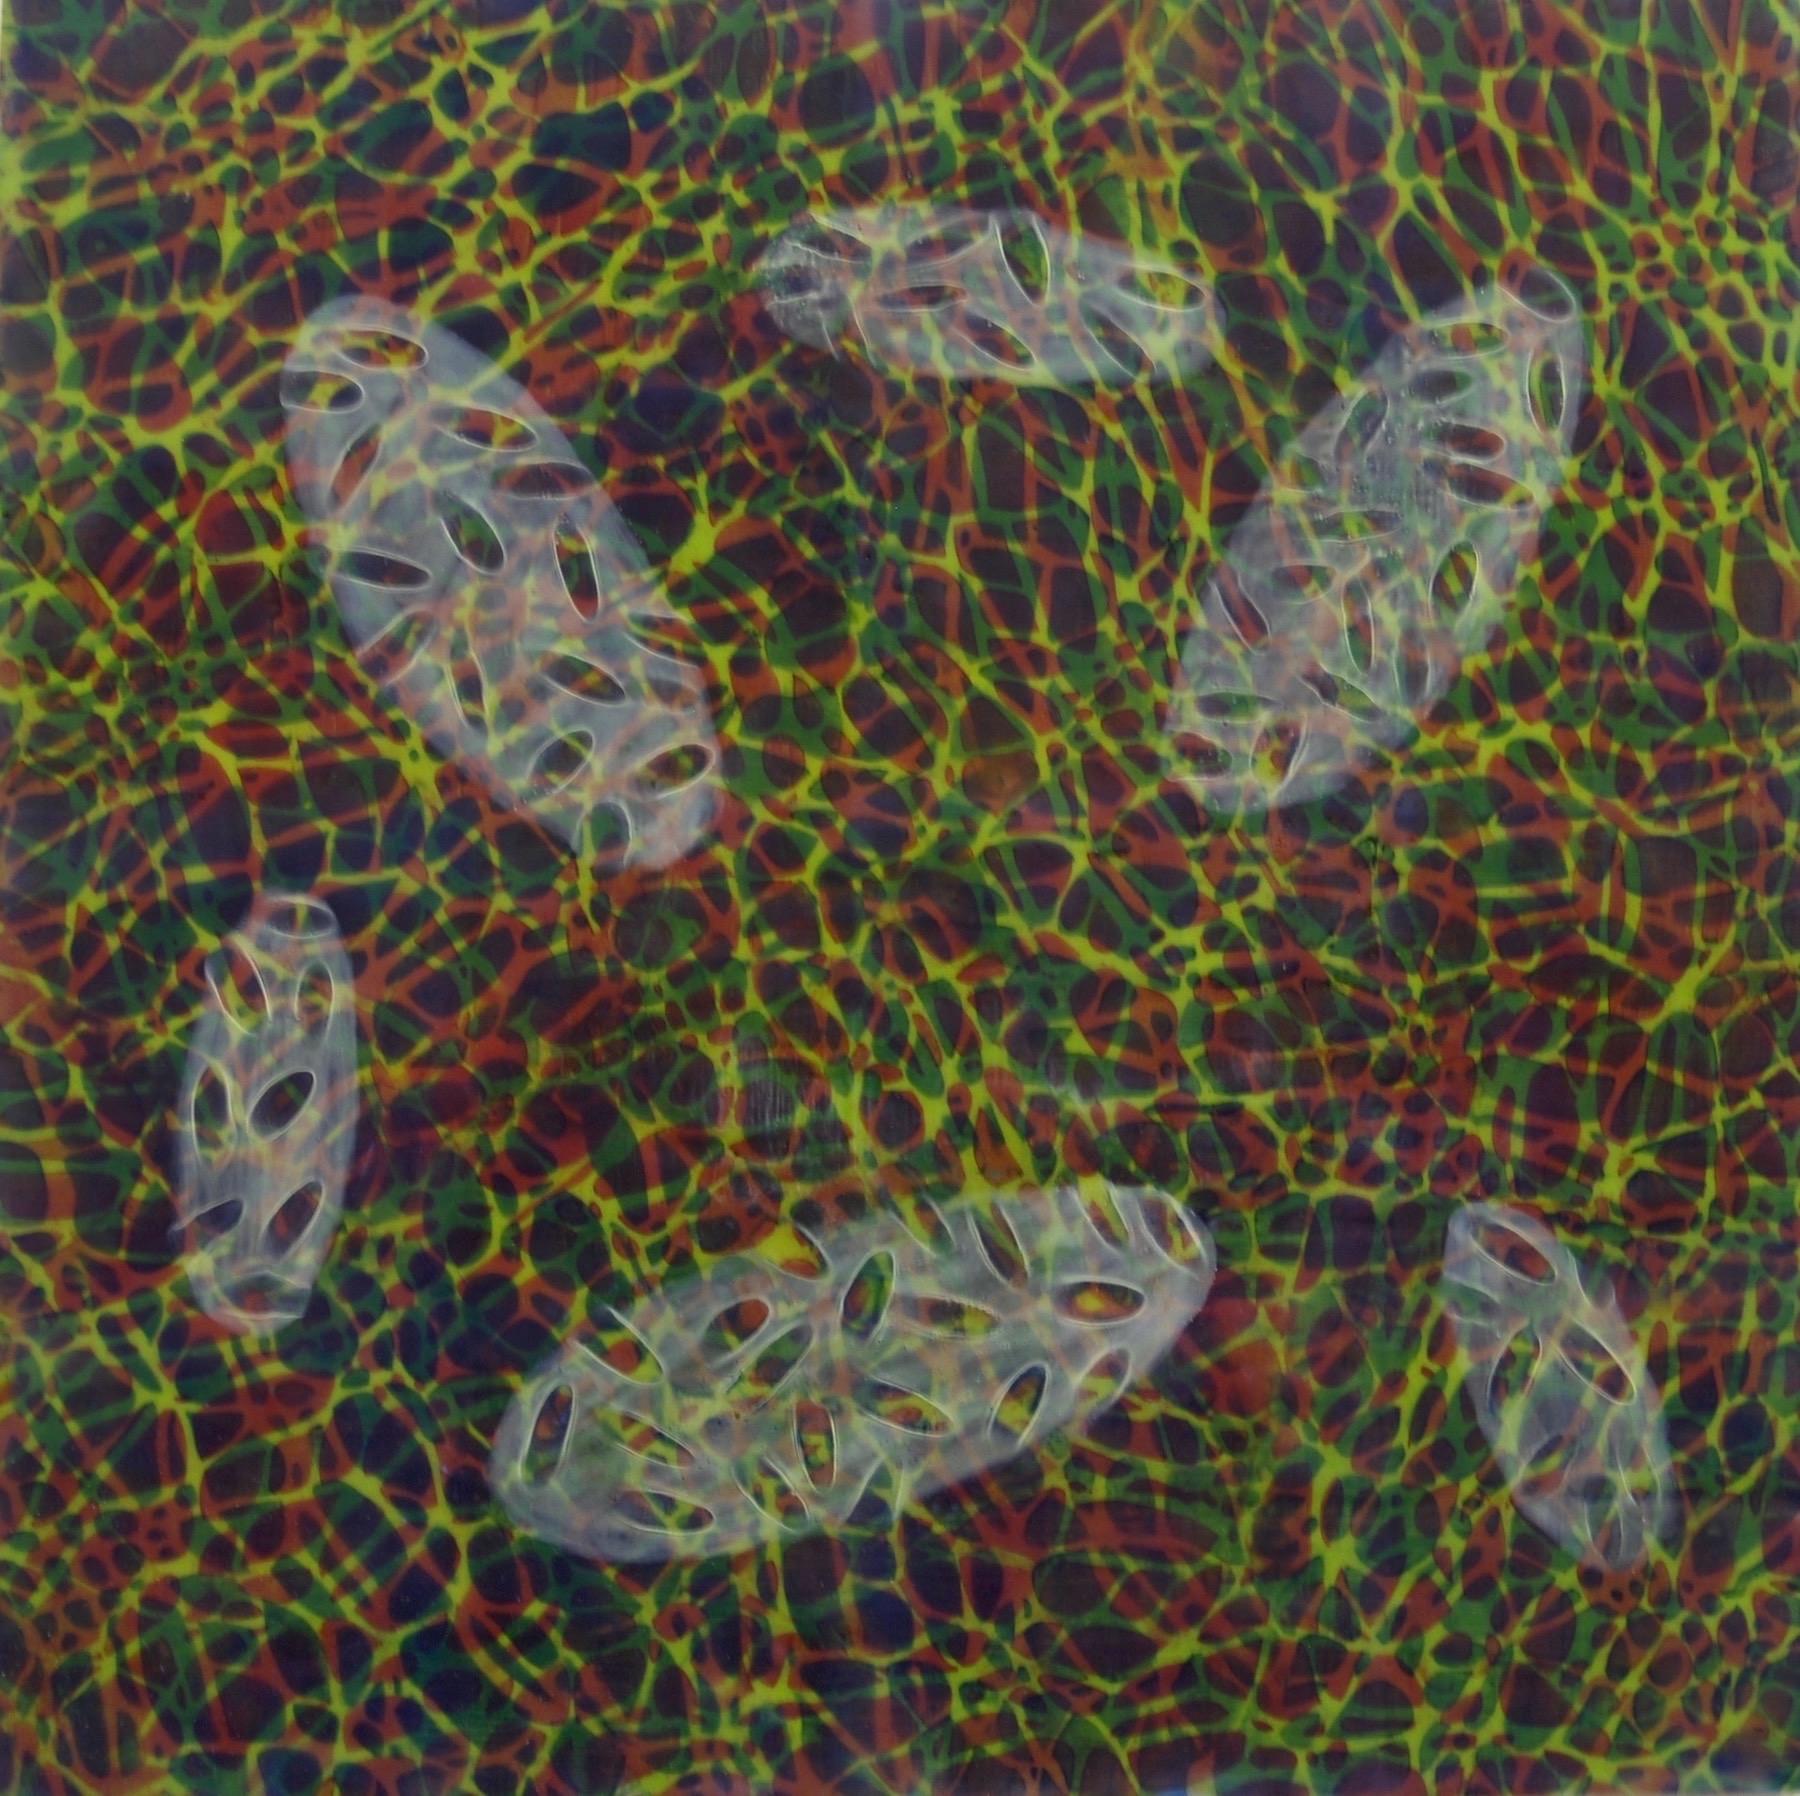 "Bio Patterns 10", encaustic, pastel, abstract, microscopic, blue, green, red